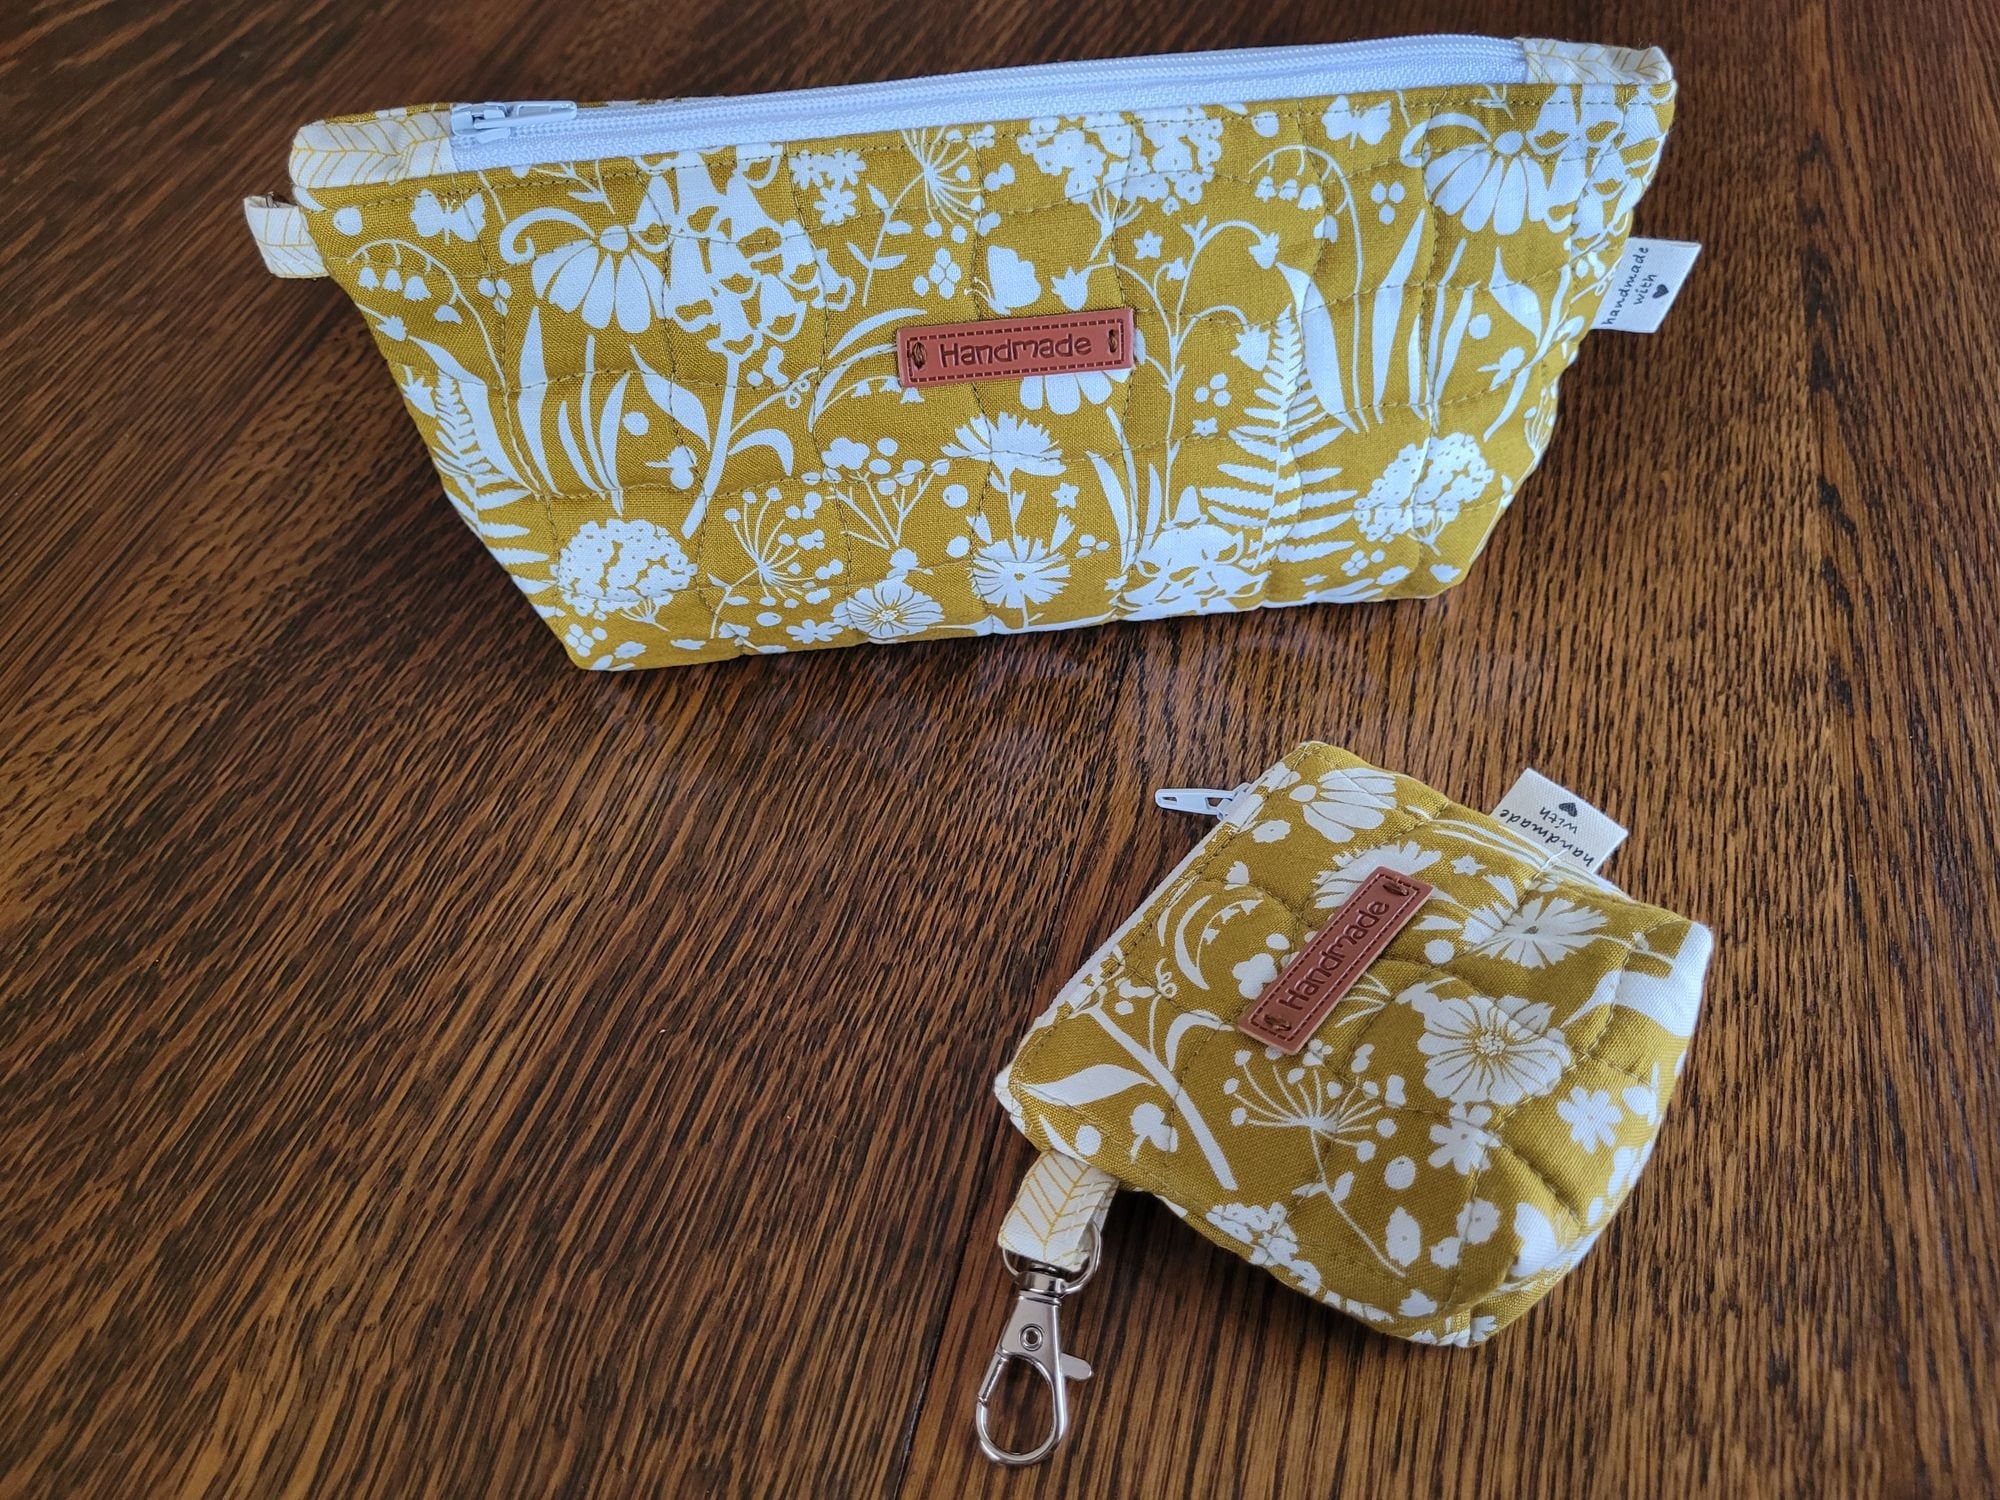 Small Zipper Pouch Set | Quilted Makeup Cosmetic Bag | Travel Toiletry Bag | Mustard Yellow Floral Stash Bag | Fabric Pencil Case